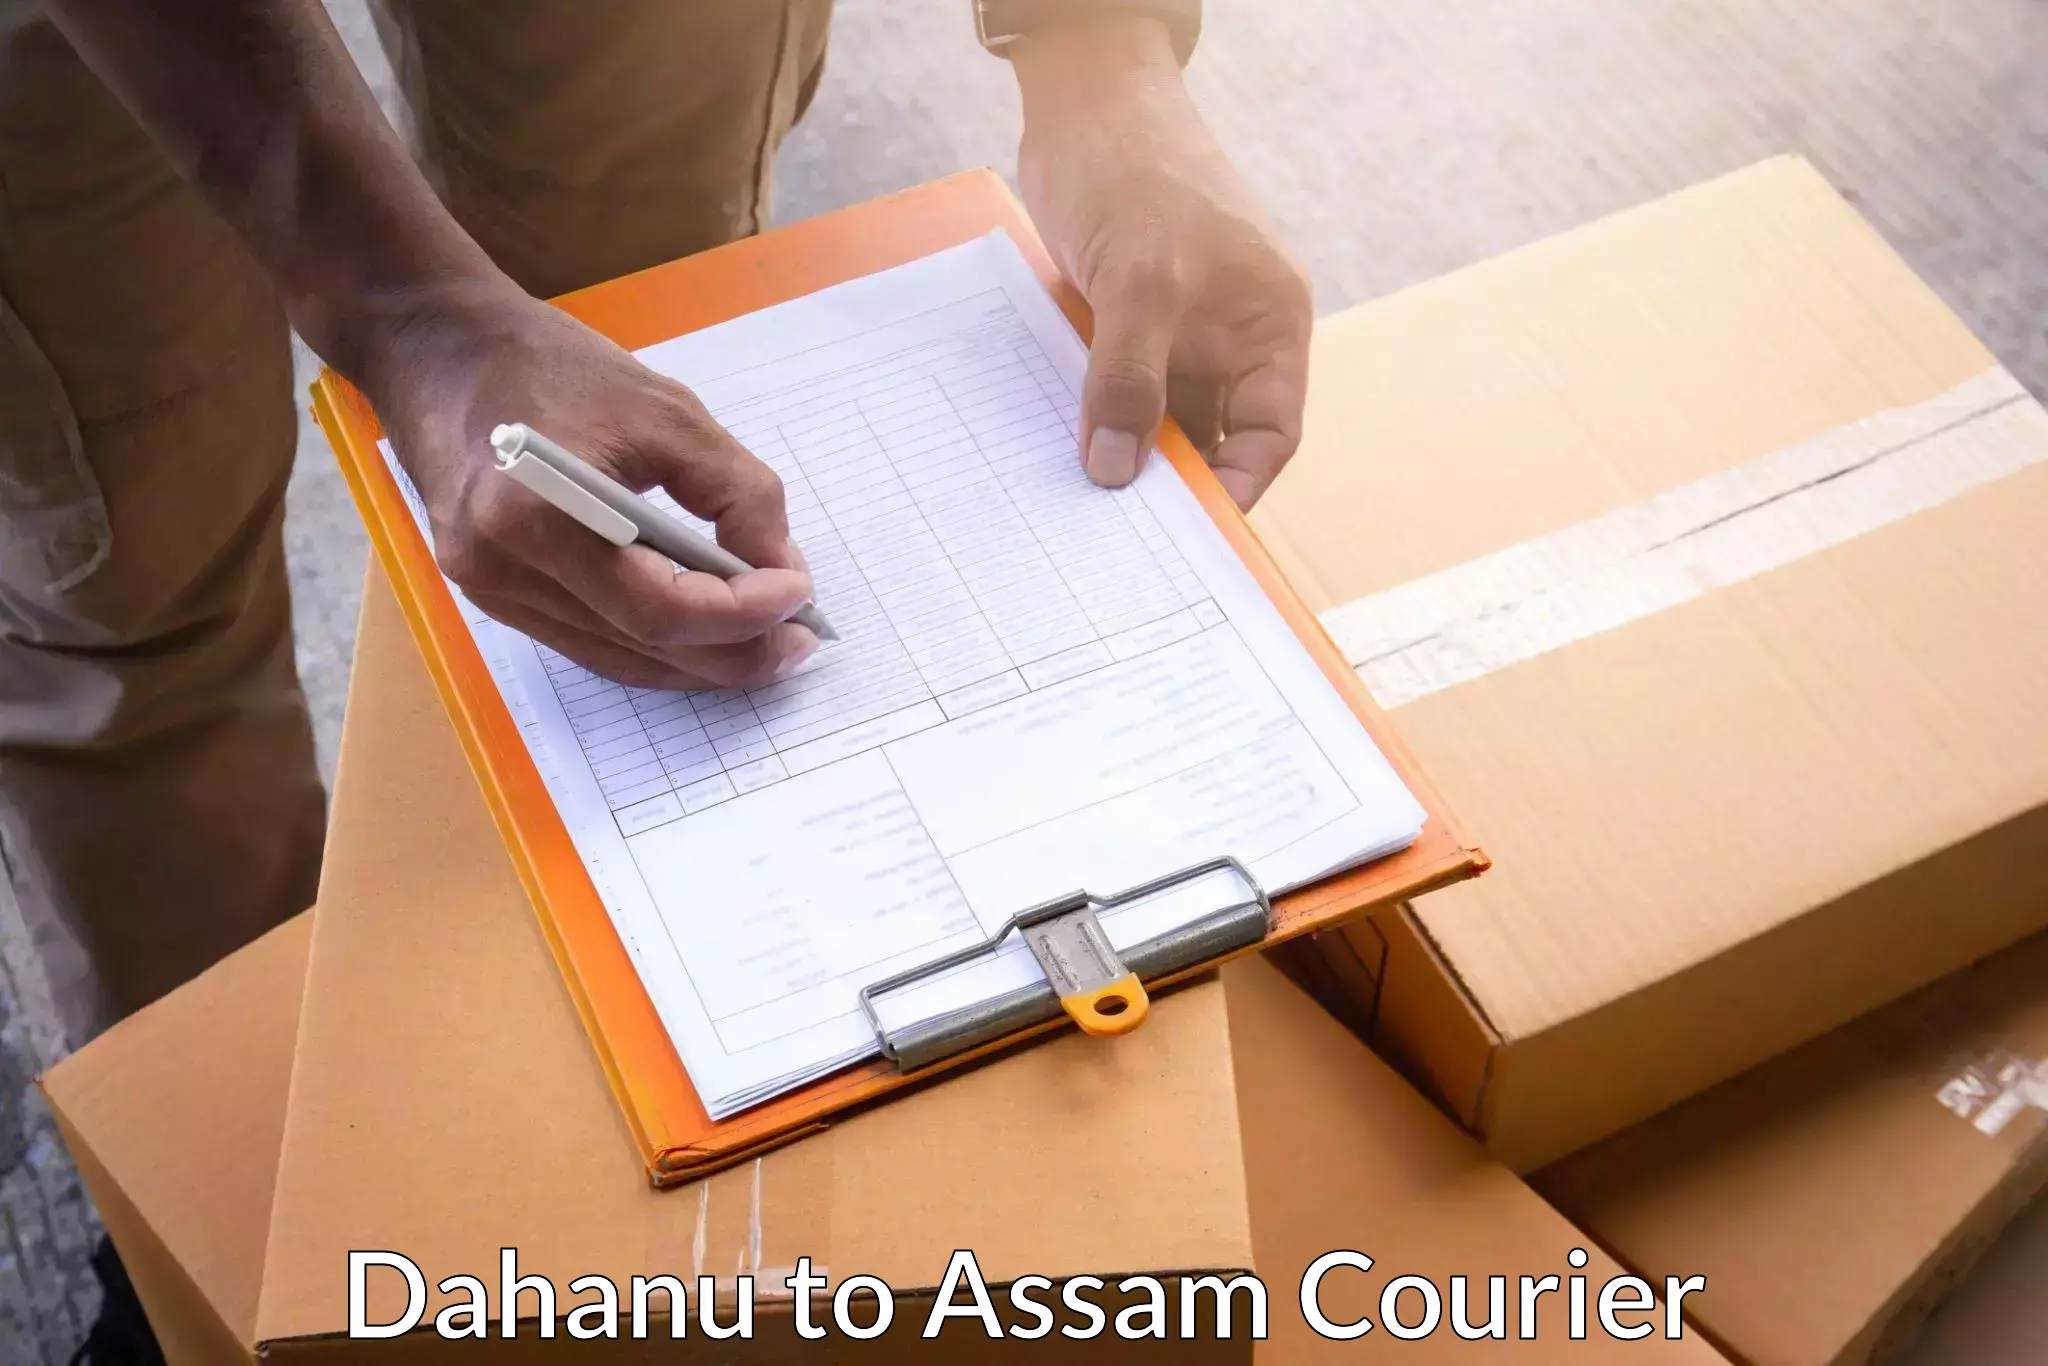 State-of-the-art courier technology in Dahanu to Guwahati University